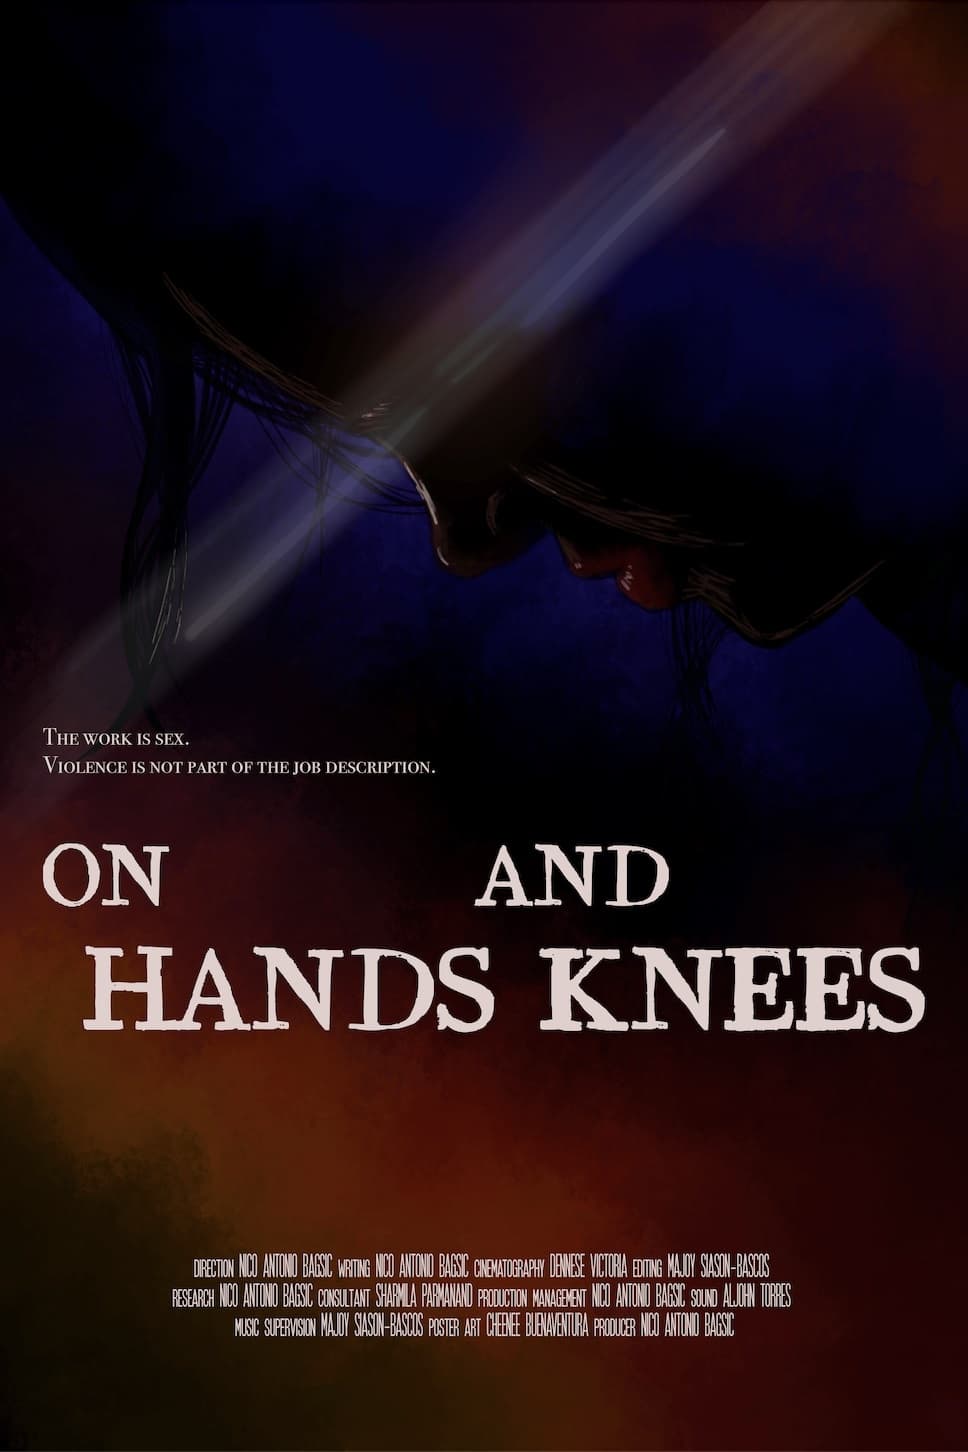 On Hands and Knees